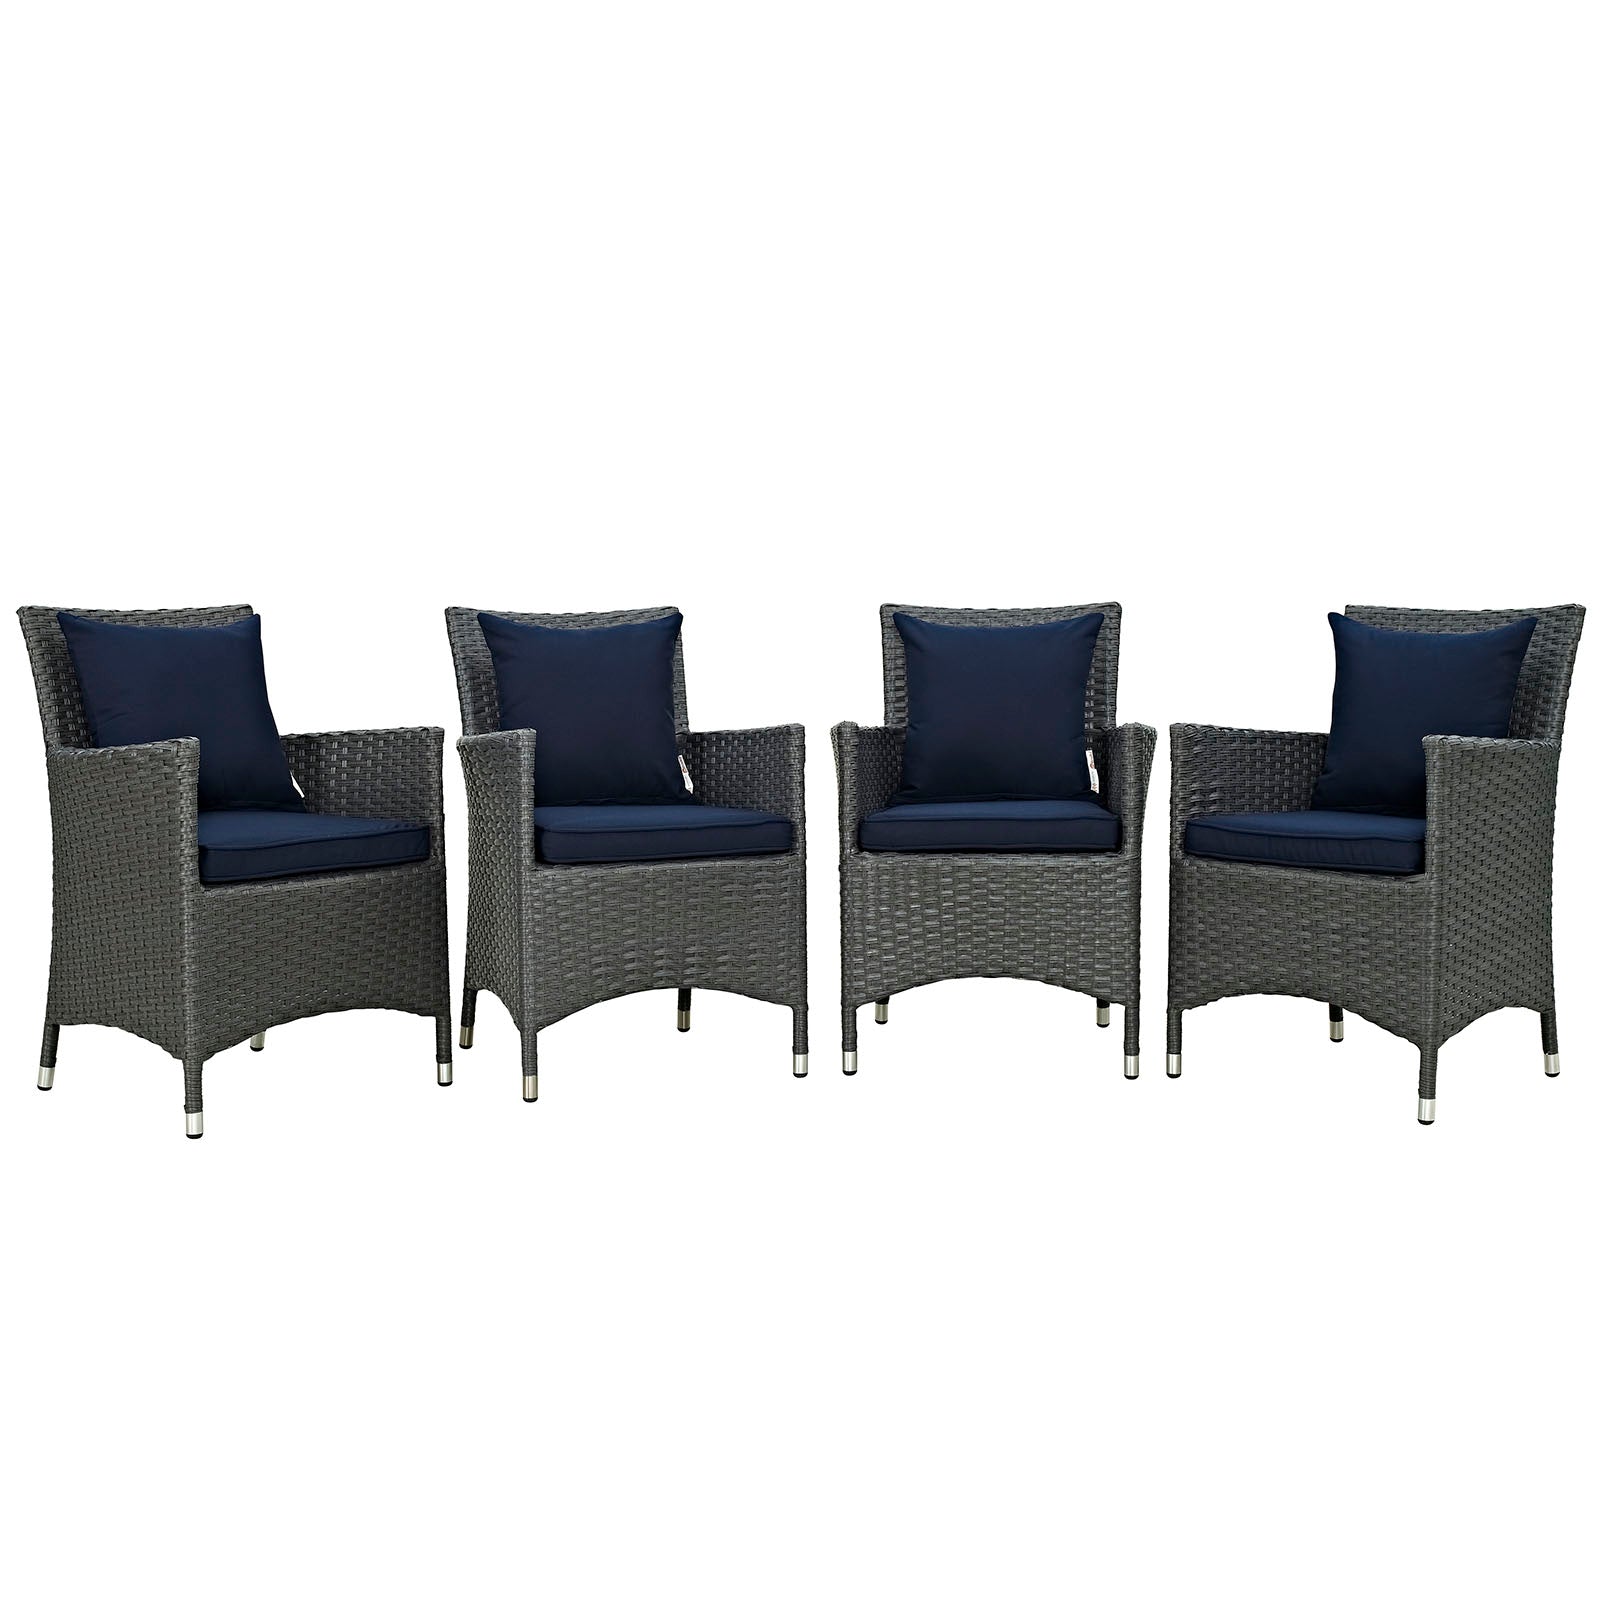 Modway Outdoor Dining Sets - Sojourn 4 Piece Outdoor Patio Sunbrella Dining Set Canvas Navy